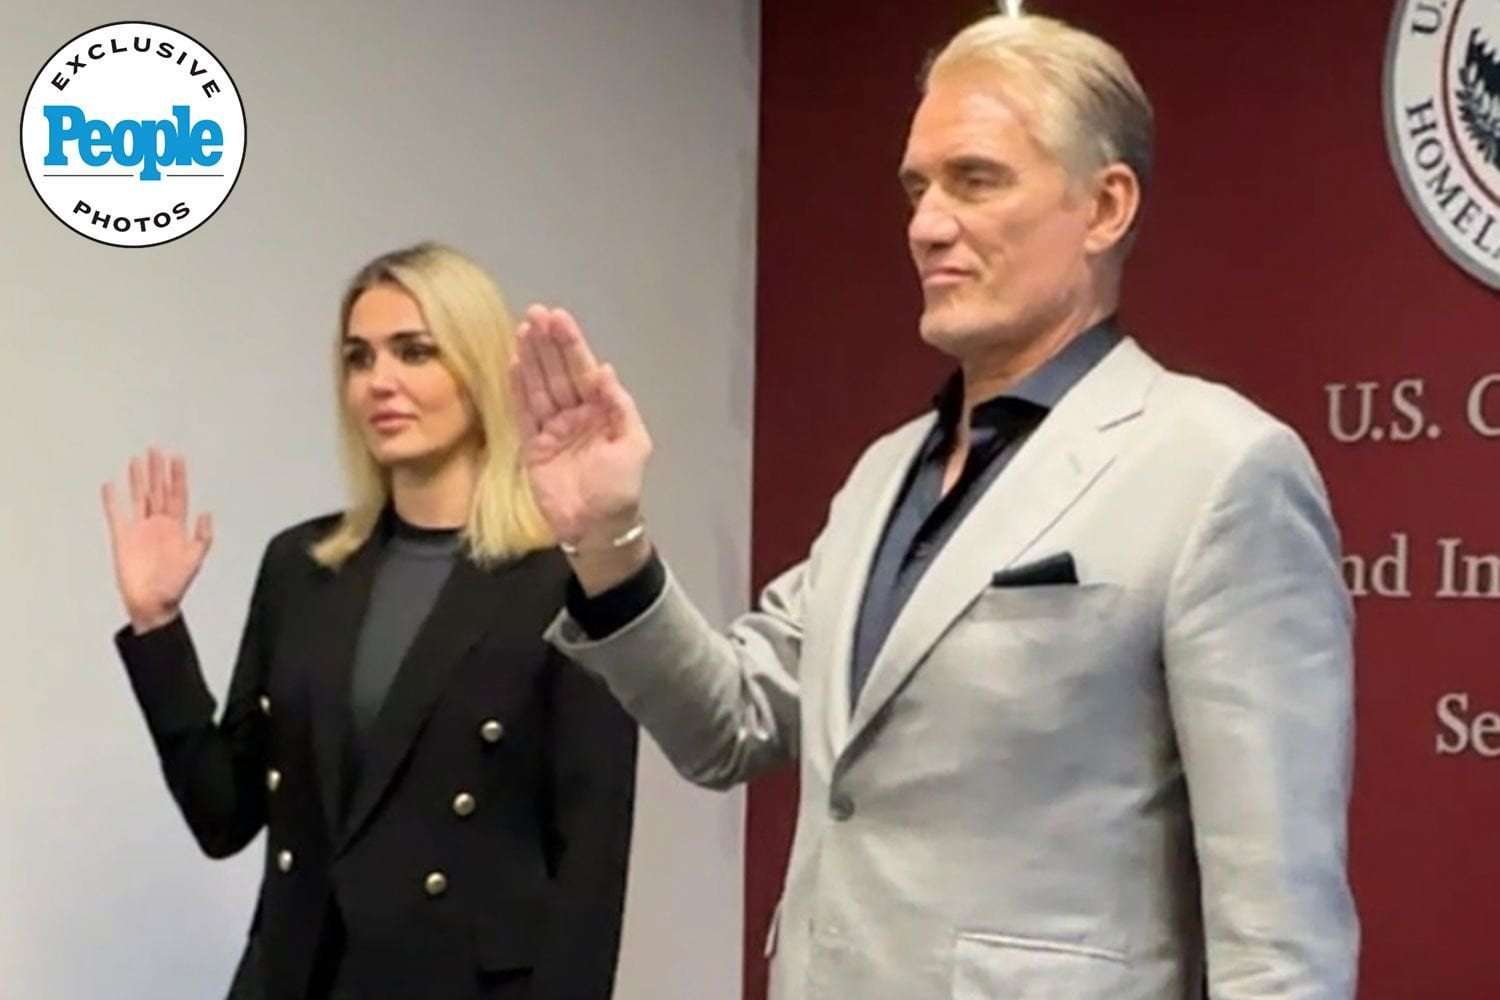 image for Dolph Lundgren and Wife Emma Krokdal Officially Become U.S. Citizens: 'It's About Time' (Exclusive)